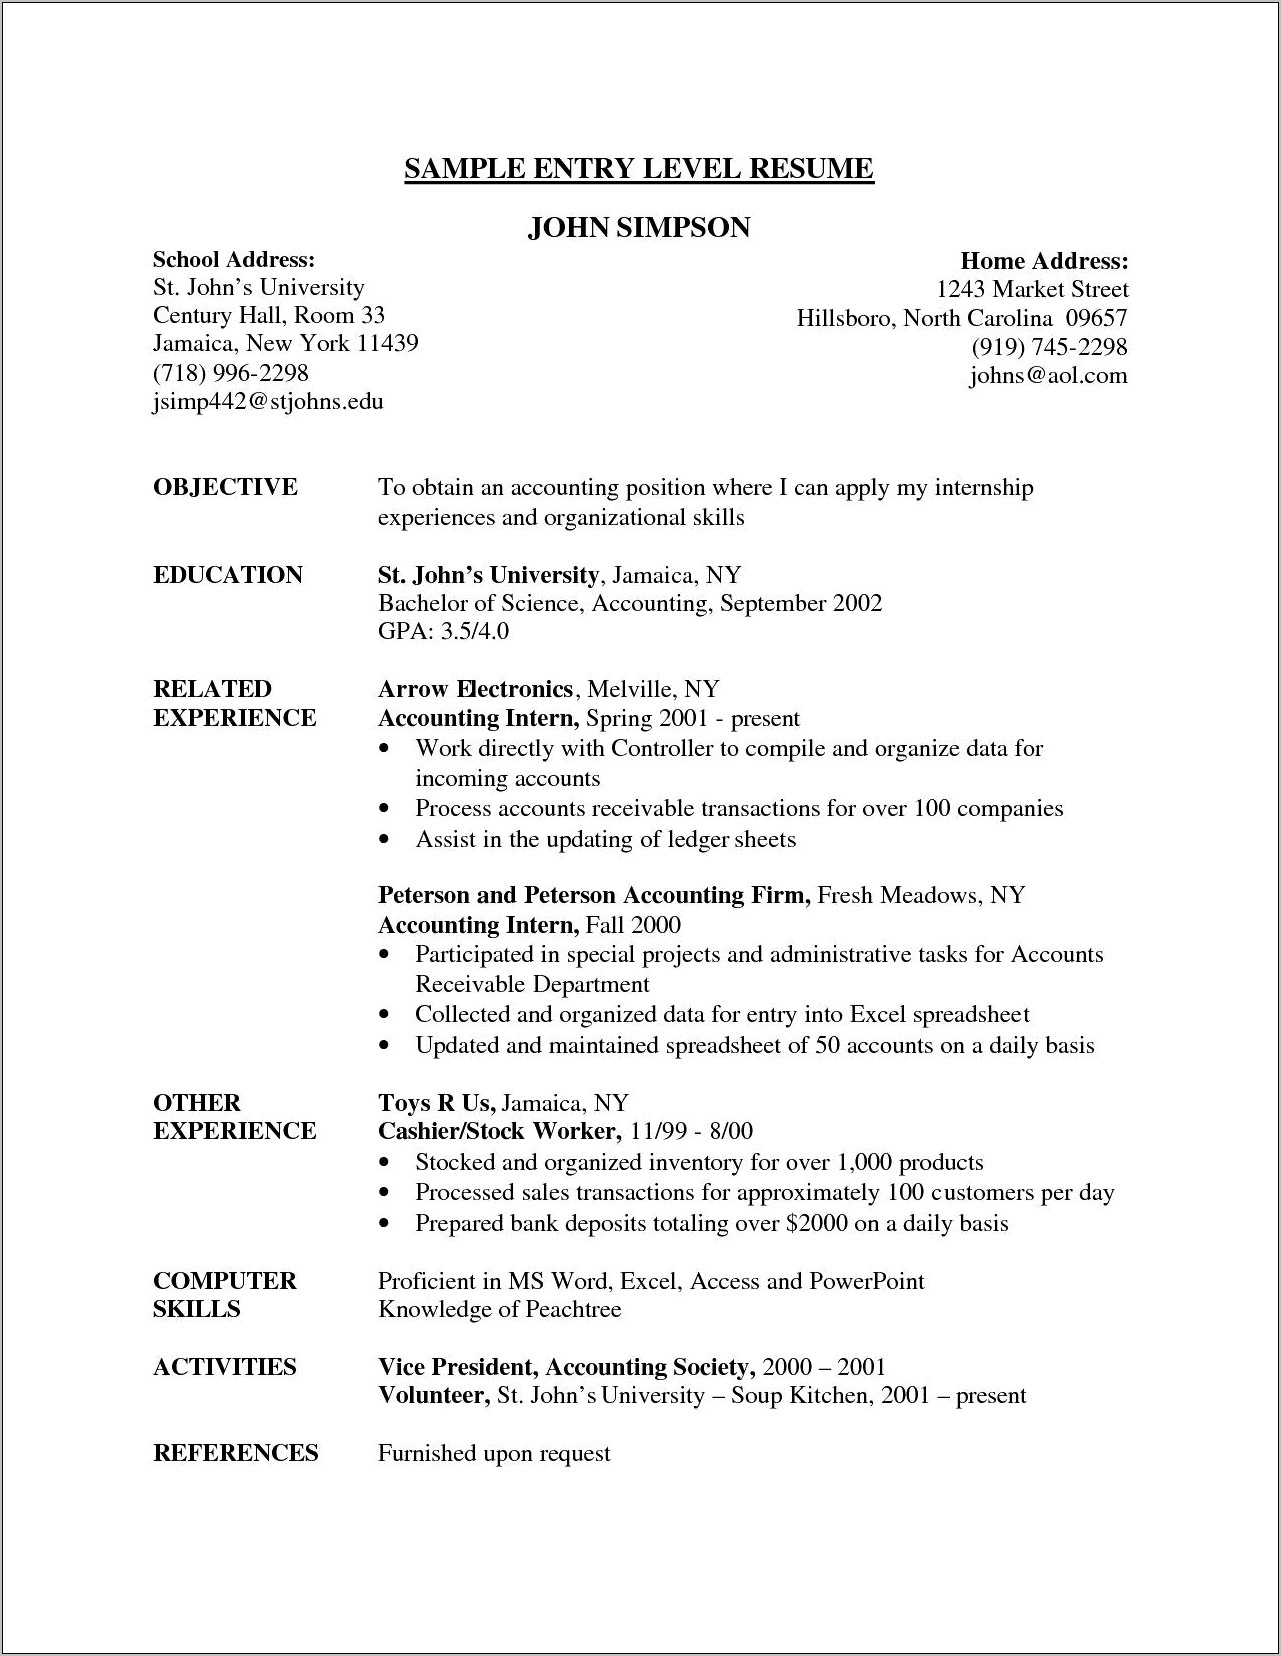 Resume Objective Statements Examples Marketing Entry Level